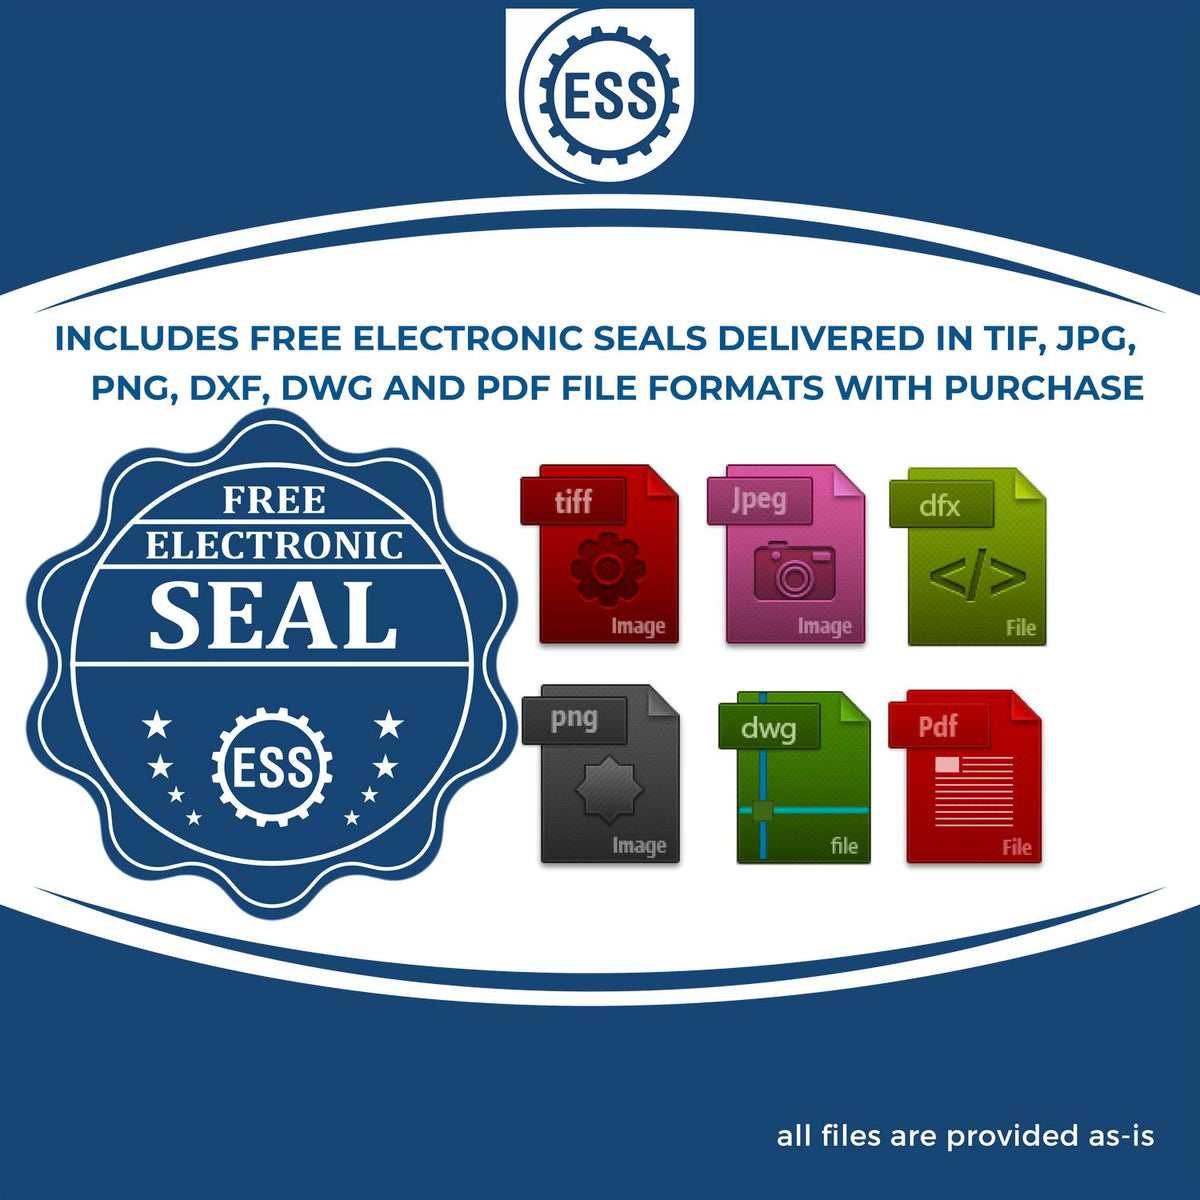 An infographic for the free electronic seal for the Self-Inking State Seal California Notary Stamp illustrating the different file type icons such as DXF, DWG, TIF, JPG and PNG.